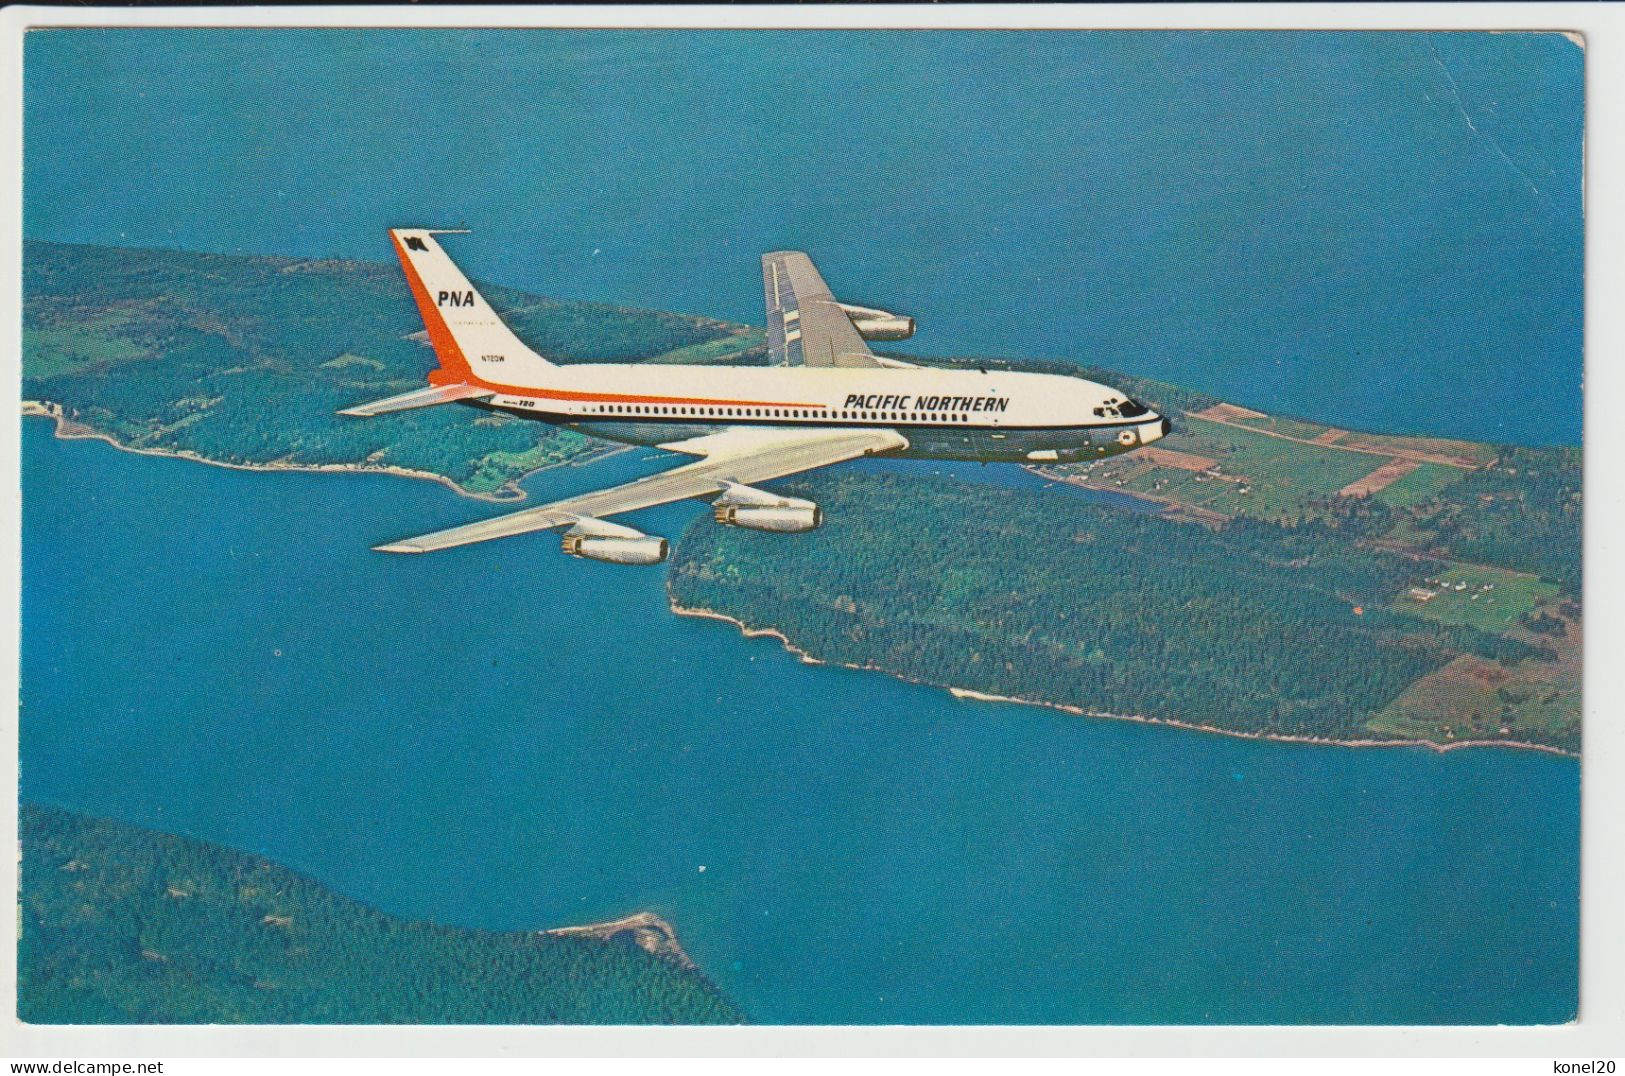 Vintage Pc PNA Pacific Northern Airlines Boeing 720 Aircraft - 1919-1938: Entre Guerres